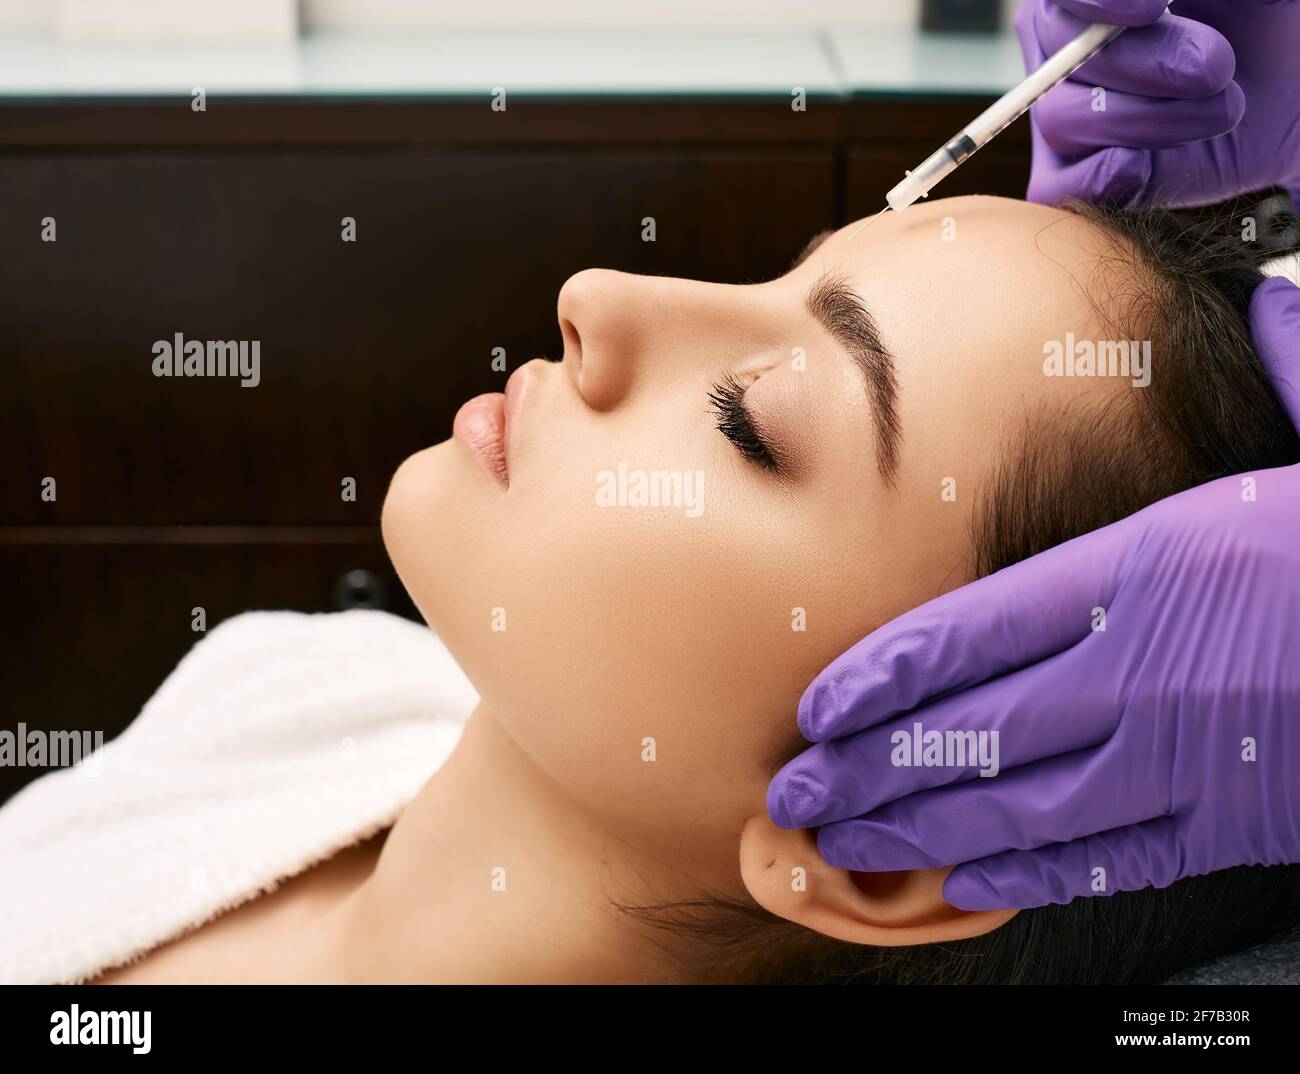 beauty injections into beautiful face. smoothing of mimic wrinkles around  the eyes using biorevitalization Stock Photo - Alamy, around smoothing 